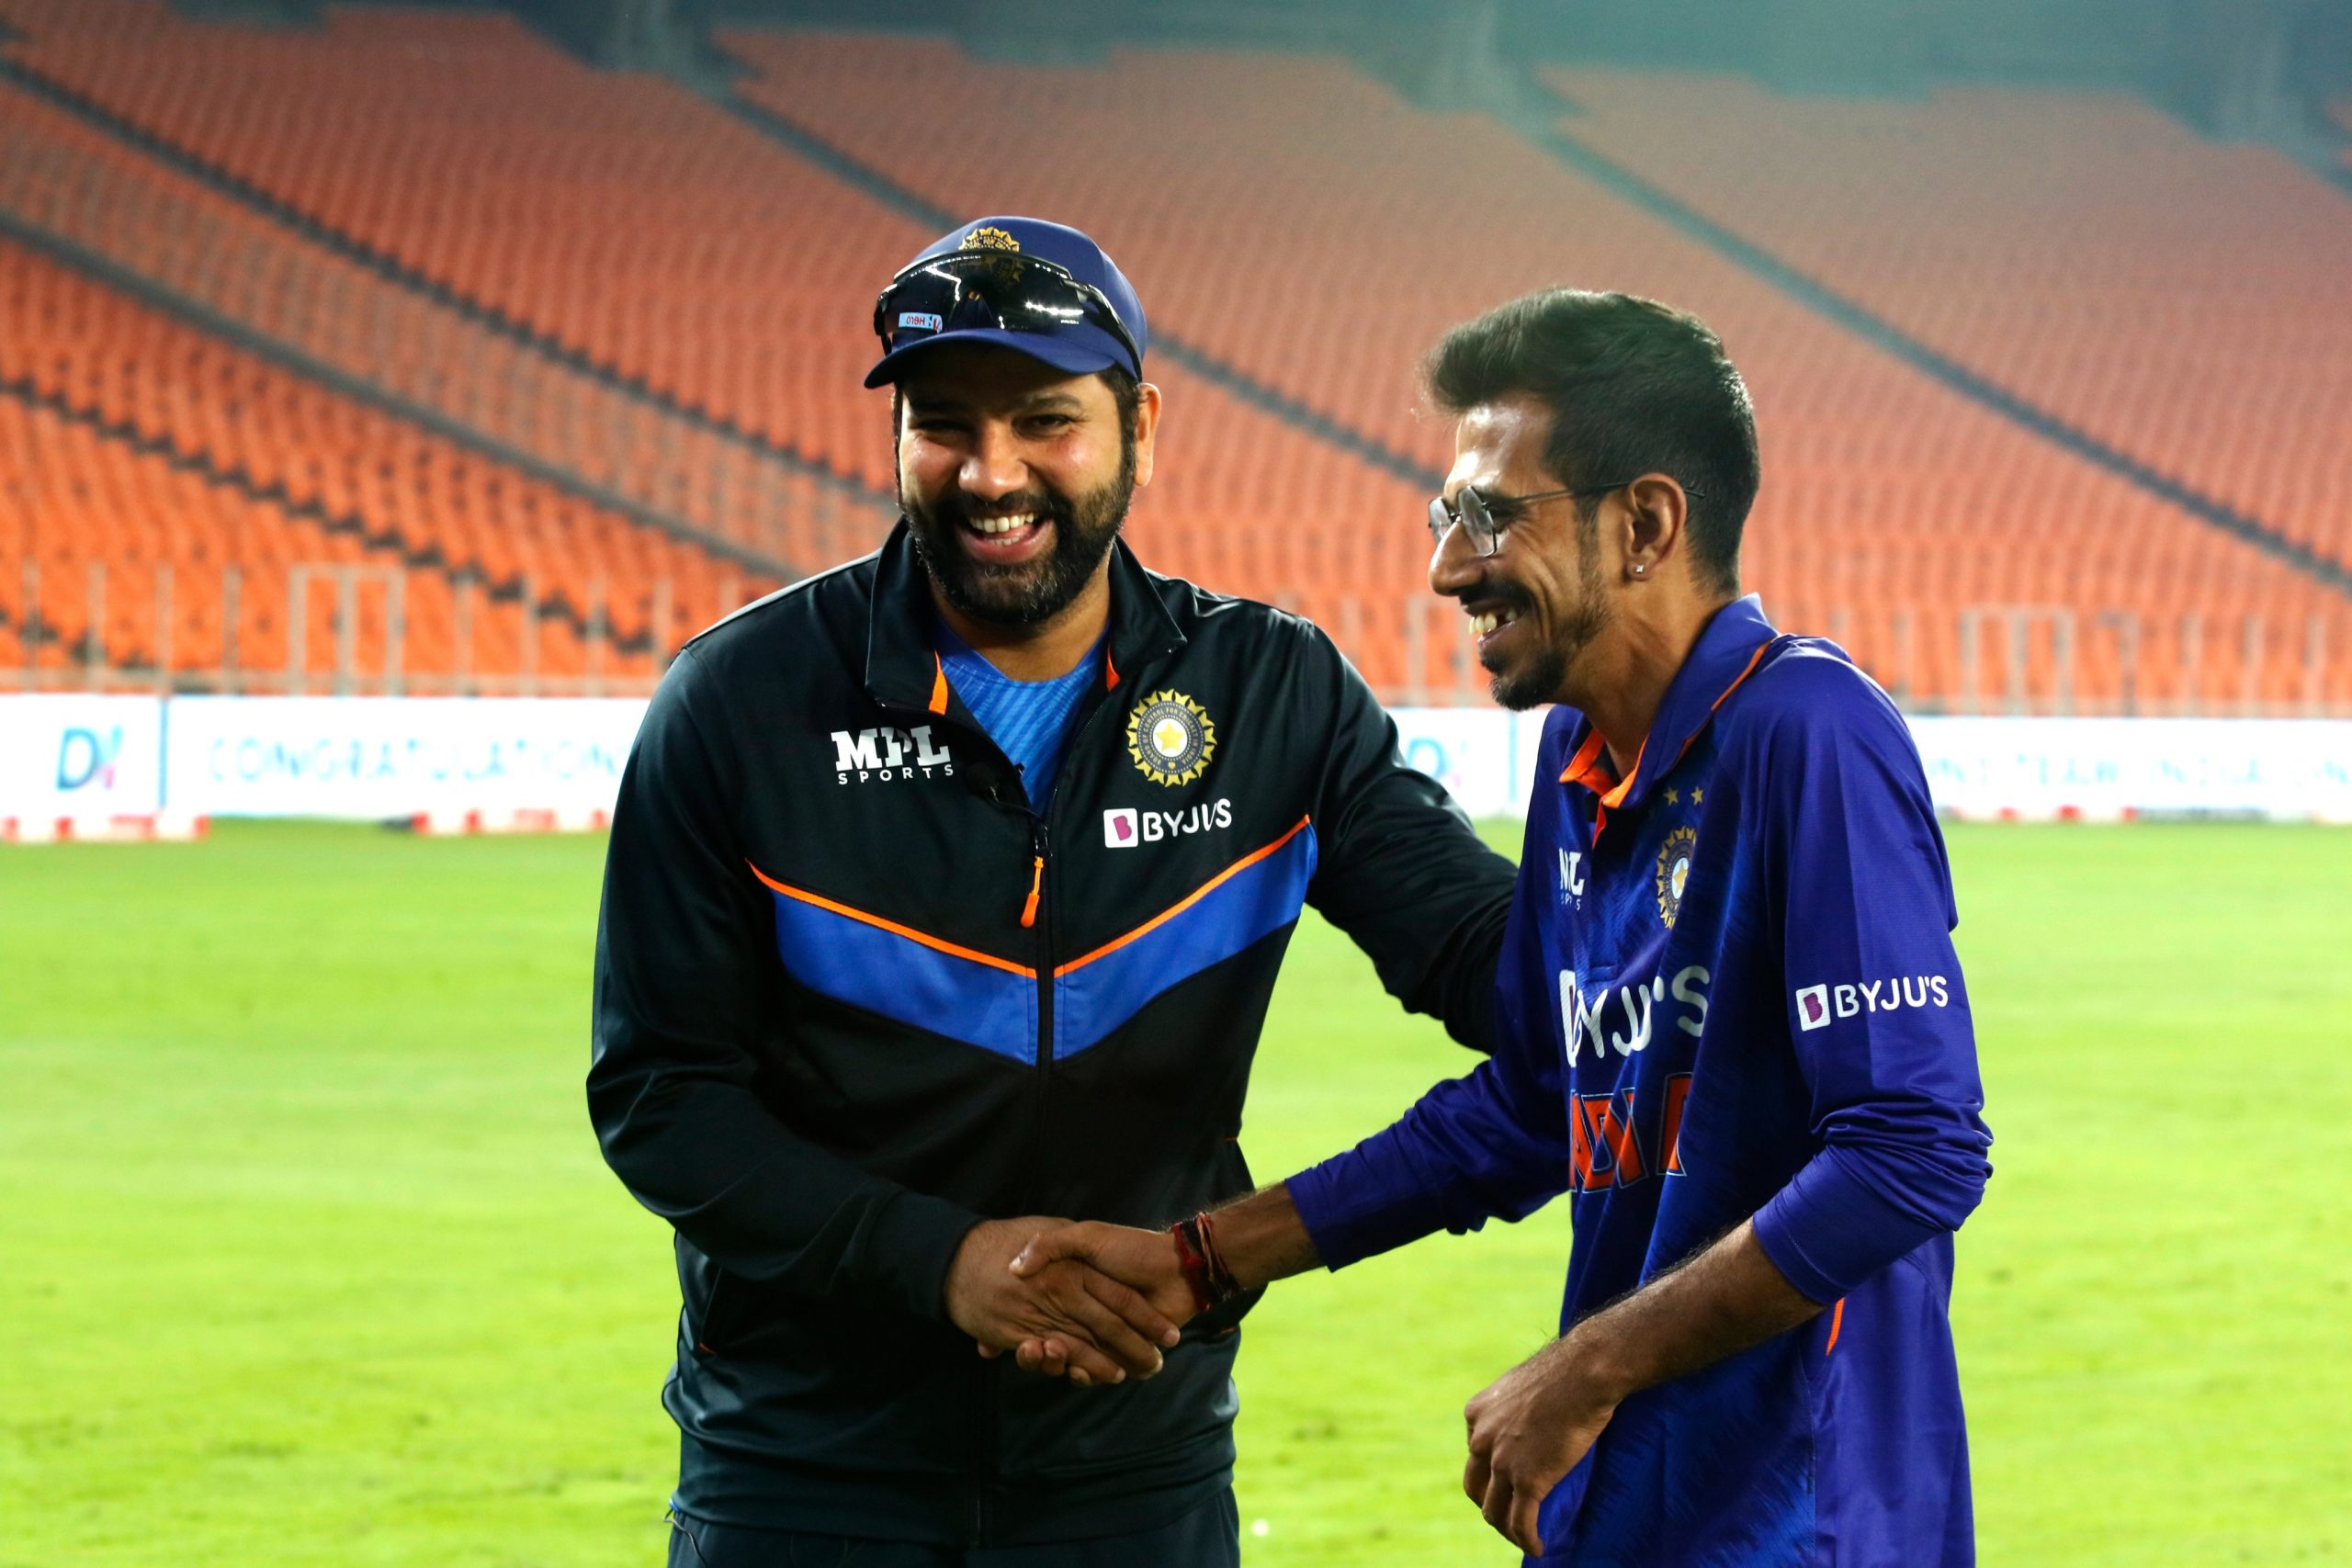 “The Auction Is Coming As Well, So Good Luck” – Rohit Sharma Teases Yuzvendra Chahal After 1st ODI